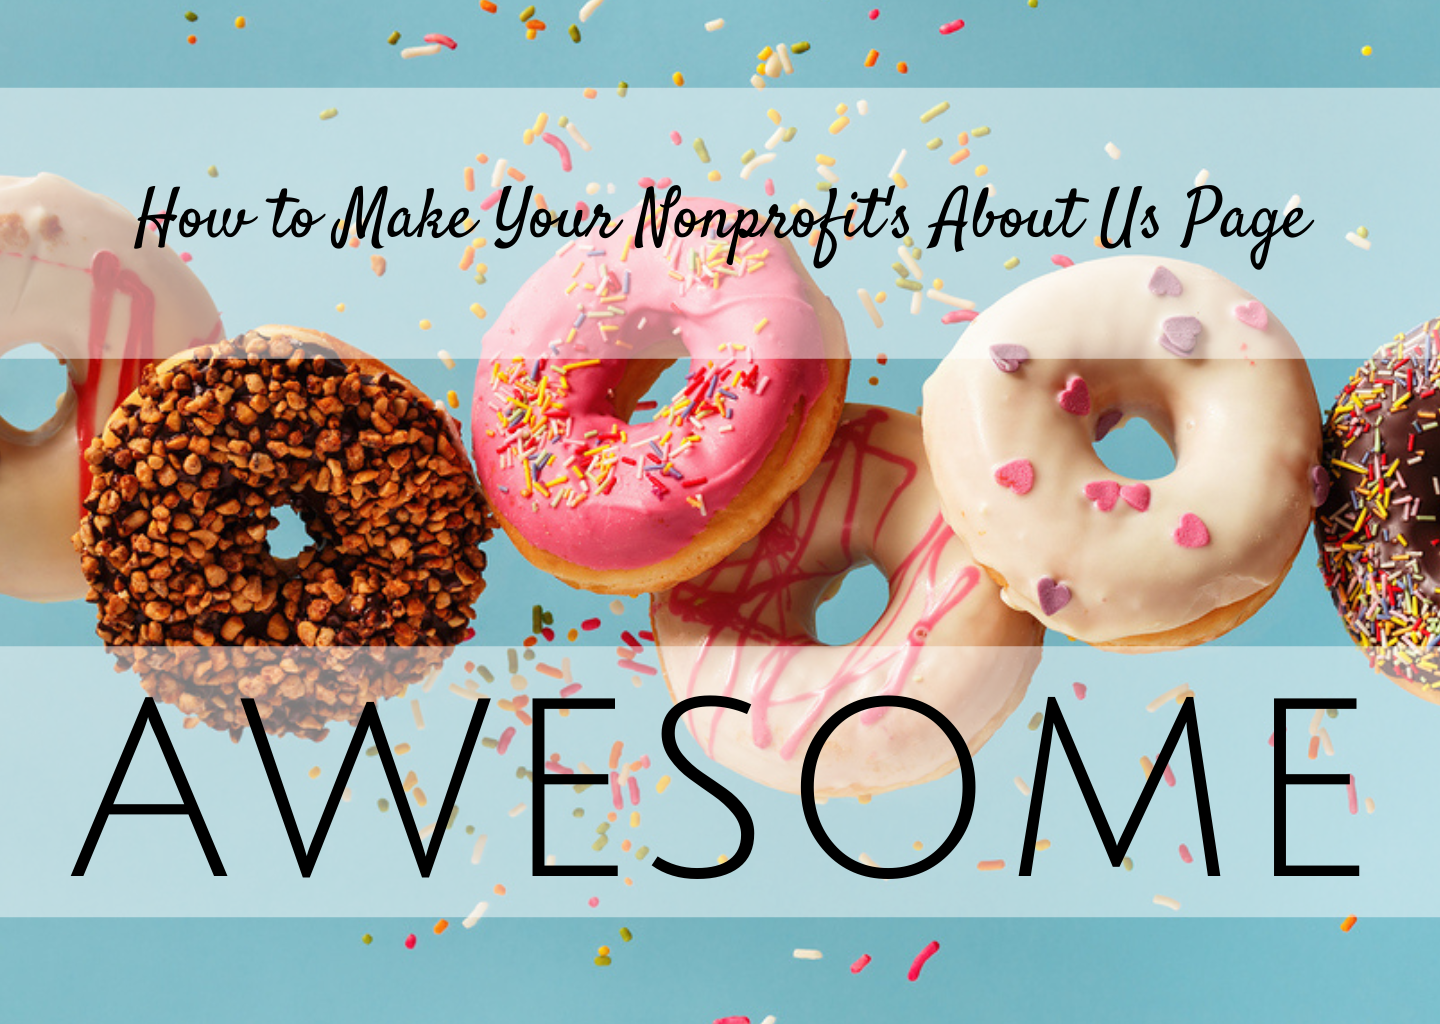 How to Make Your Nonprofit’s About Us Page Awesome